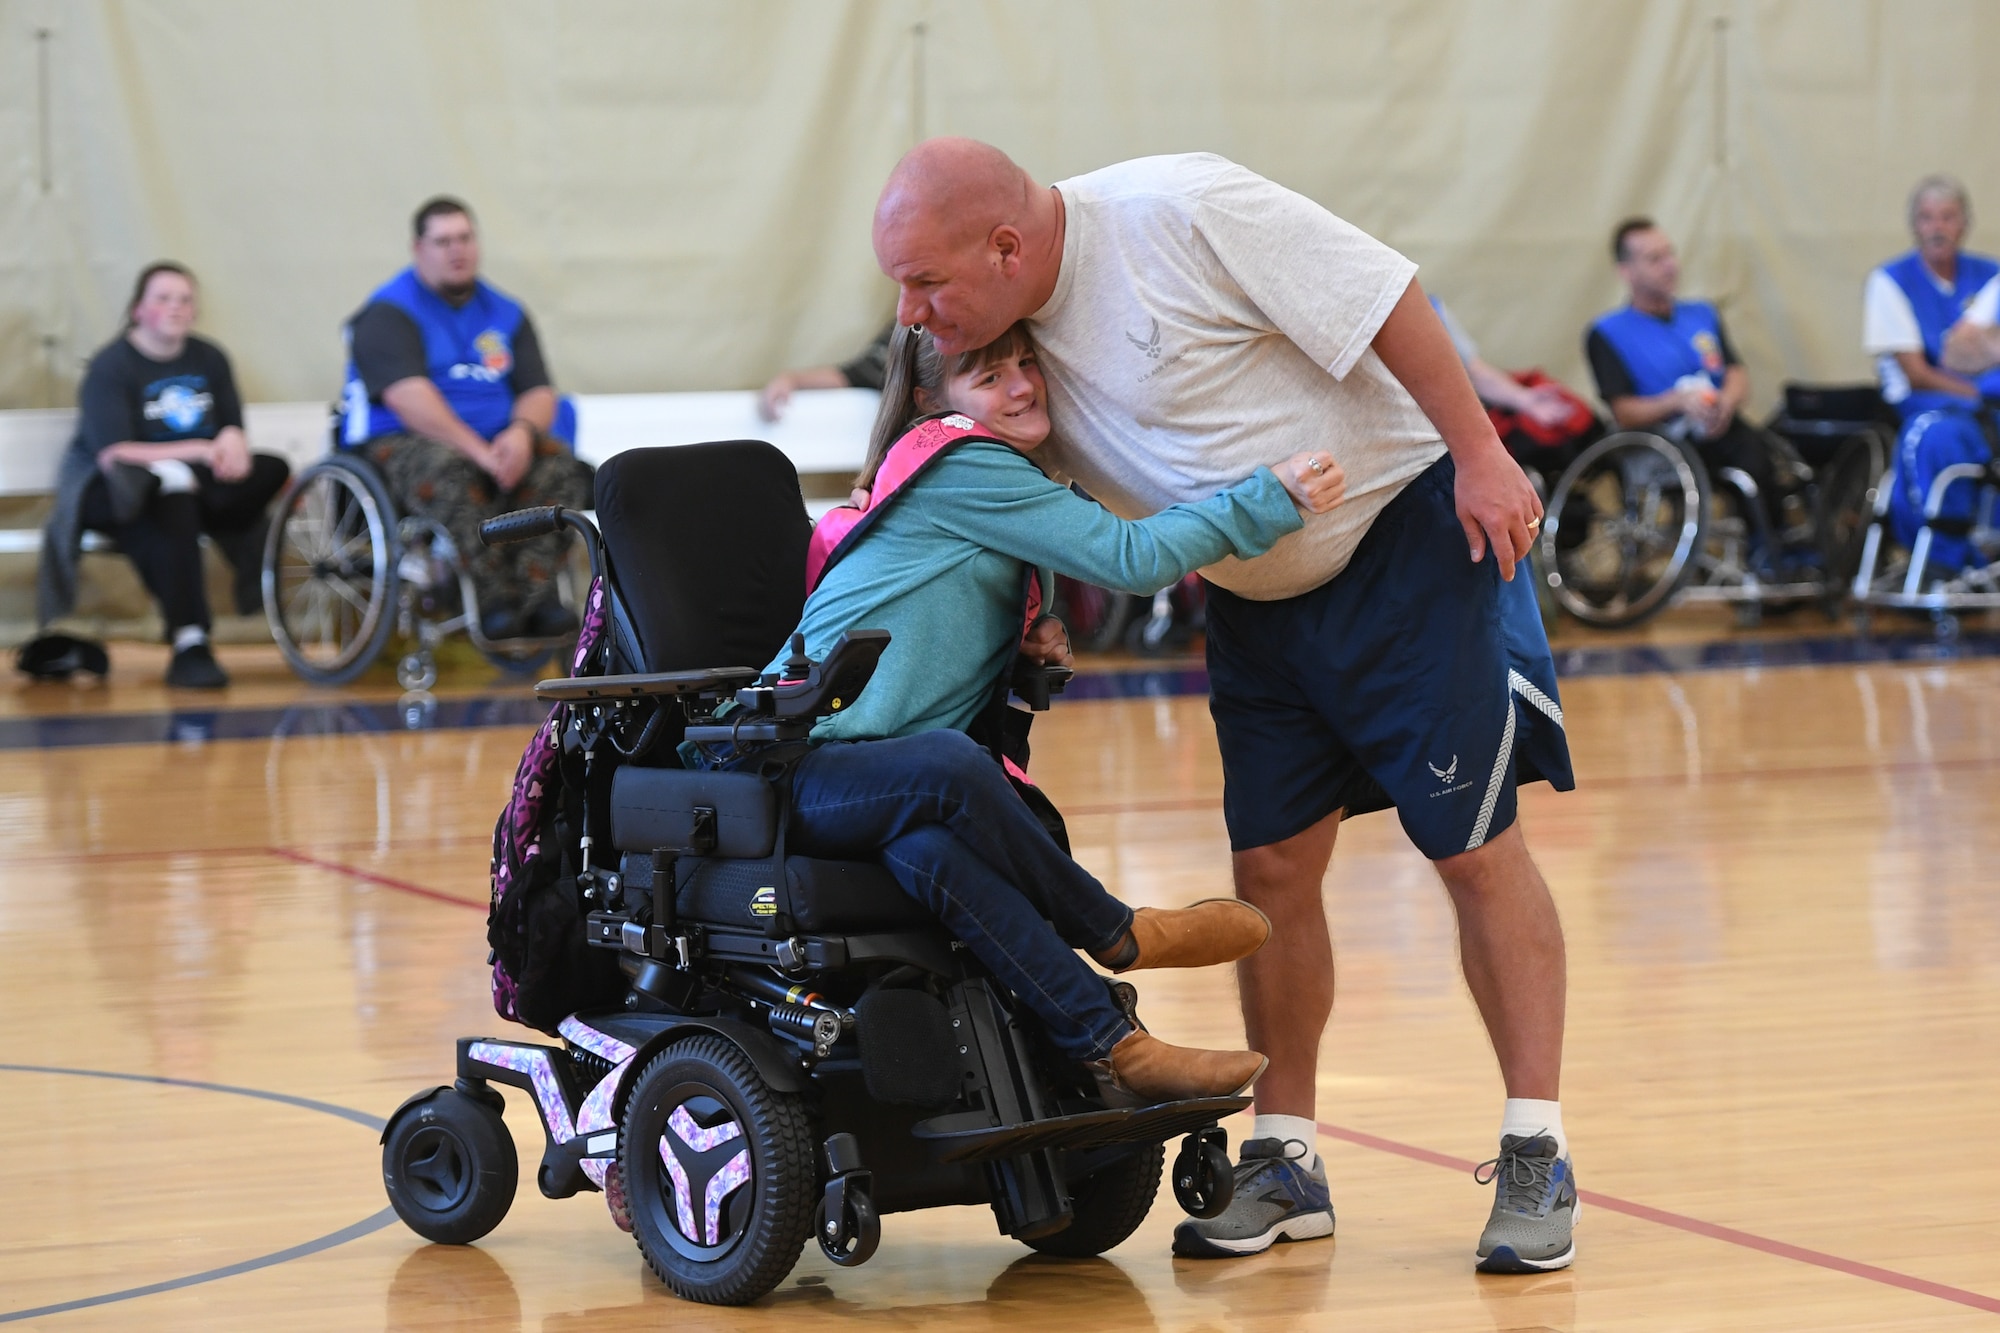 Master Sgt. Scott Heim, 388th Maintenance Squadron, hugs his daughter Brianna during halftime while being introduced as one of the basketball players who has an exceptional family member. Leaders from Hill's units faced off against the Ogden Wheelin' Wildcats, a semi-professional wheelchair basketball team, to celebrate National Disability Employment Awareness Month. (U.S. Air Force photo by Cynthia Griggs)